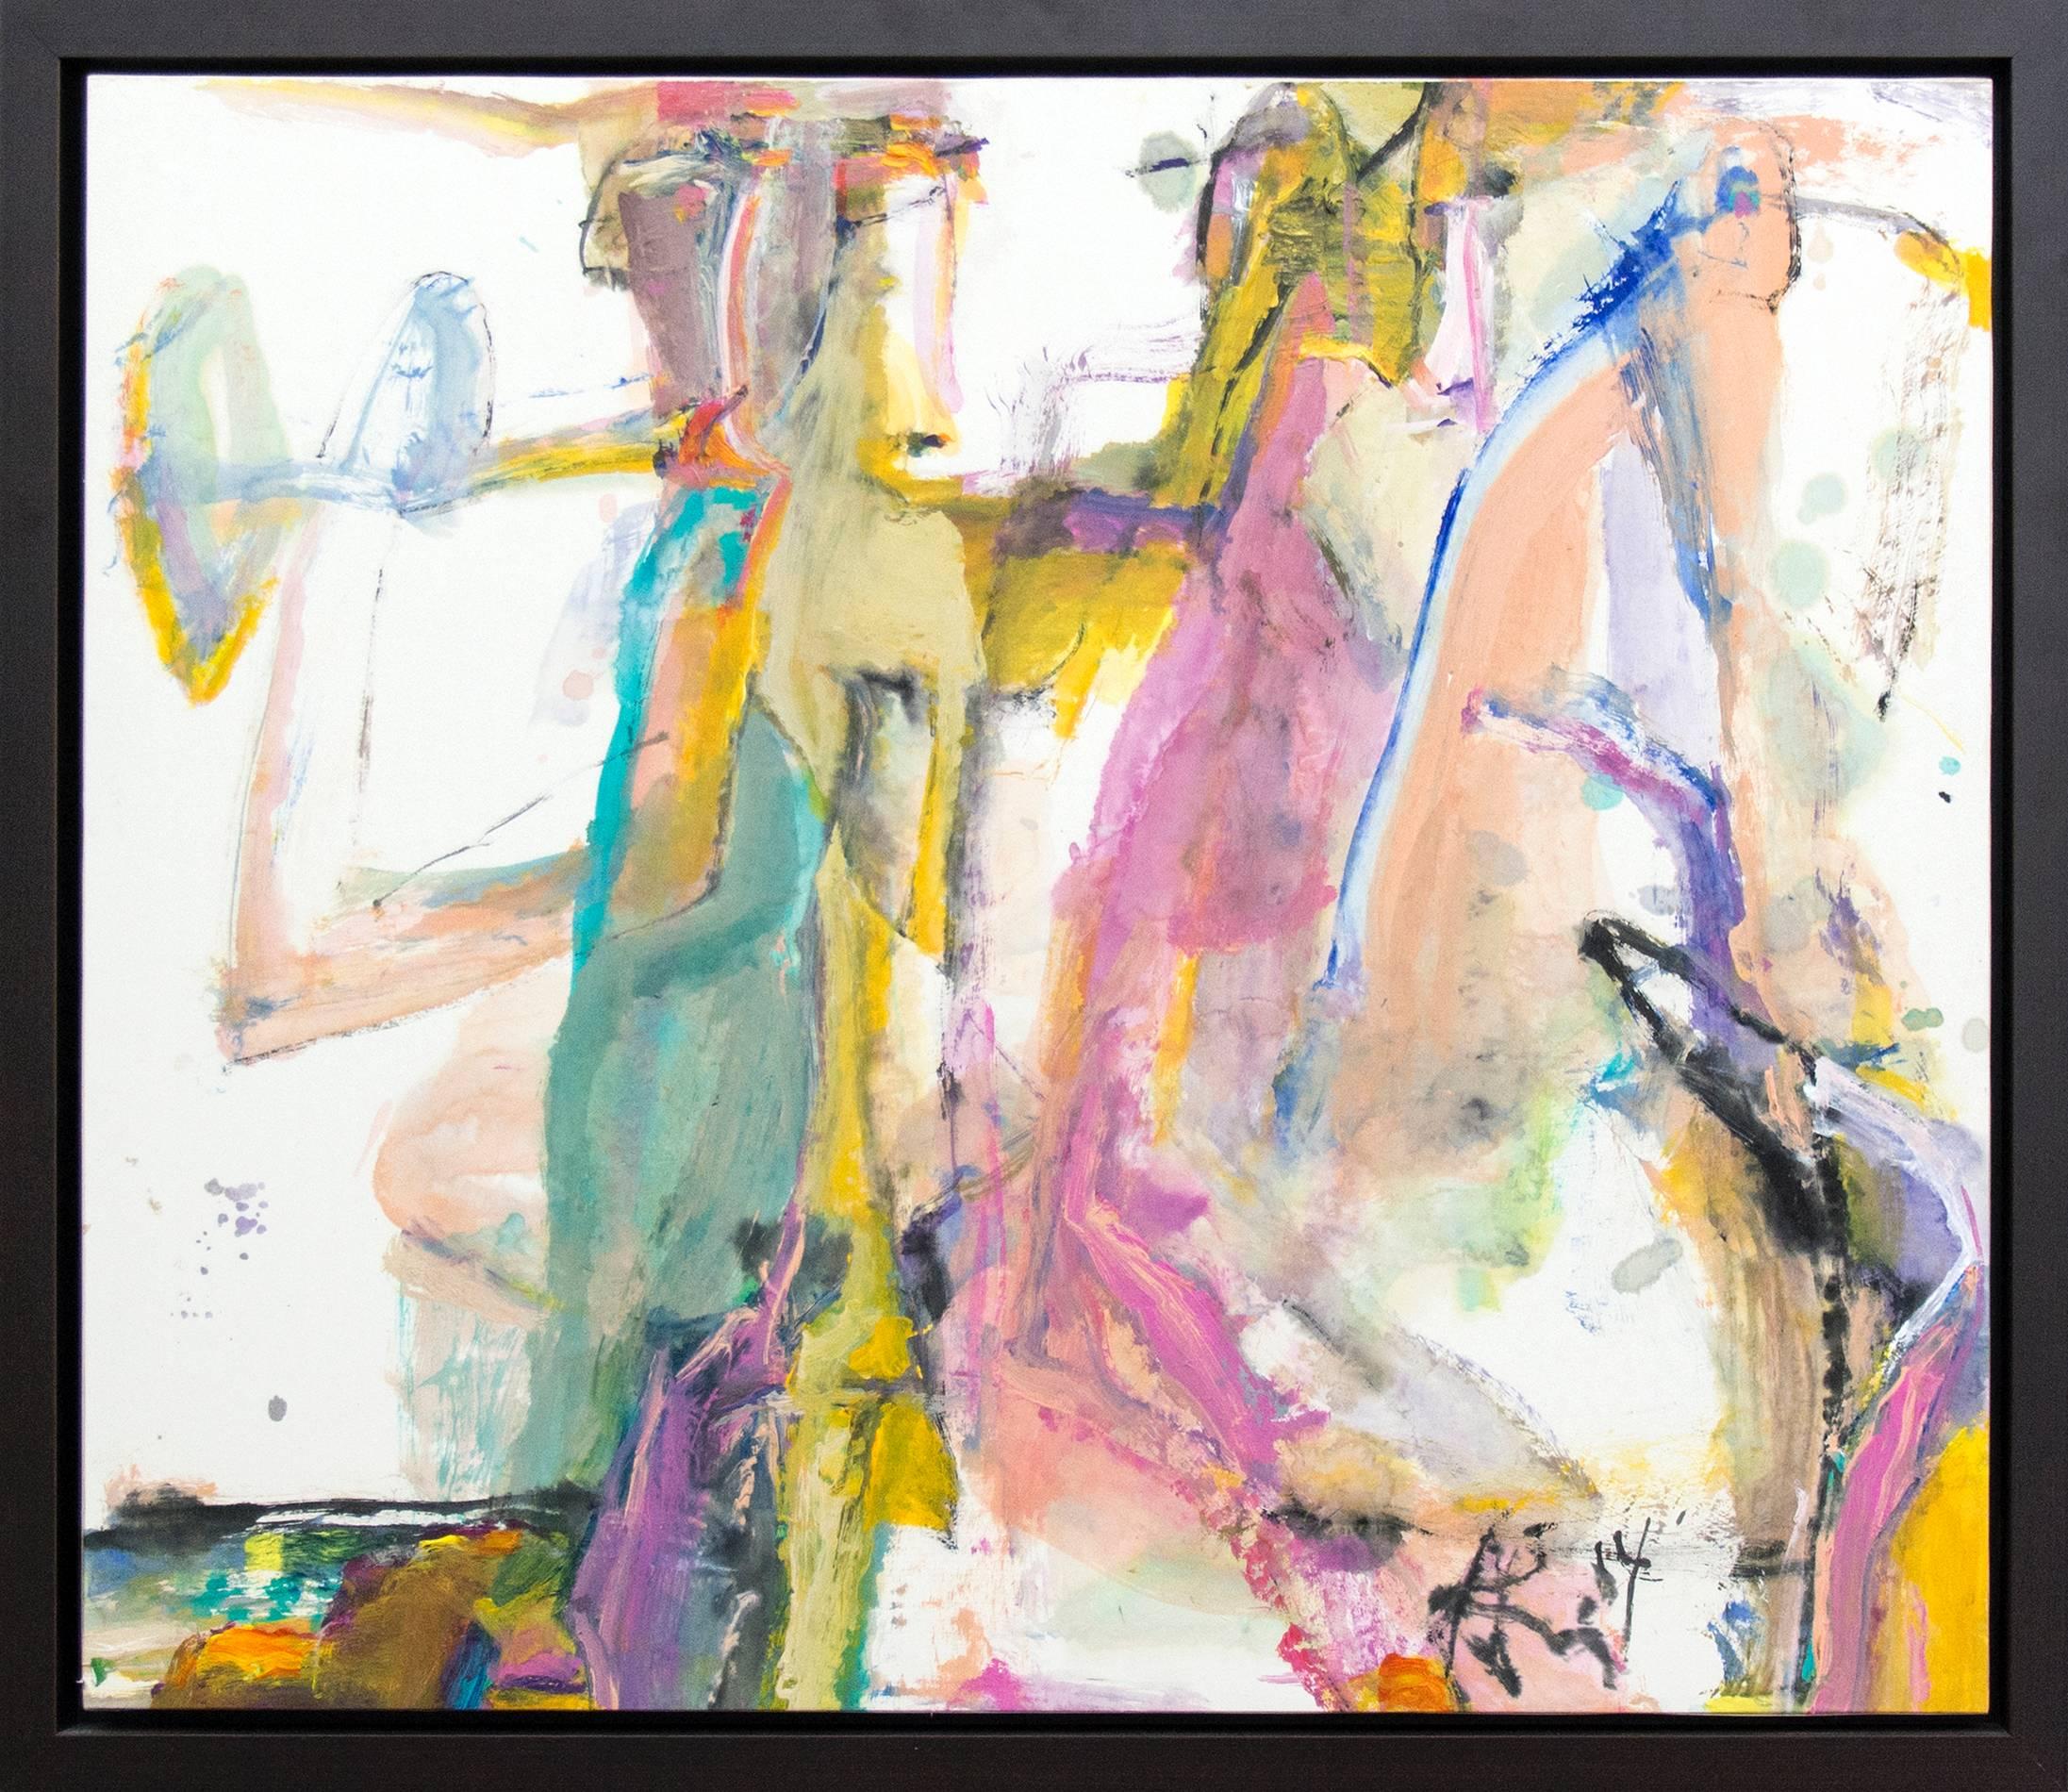 Brushed swaths of mauve, pink, violet, turquoise and deep yellow intersect with vigorous lines in grey and black to form a dynamic abstract composition in this 33 inch wide ink and acrylic painting on rice paper. The colorful forms created are